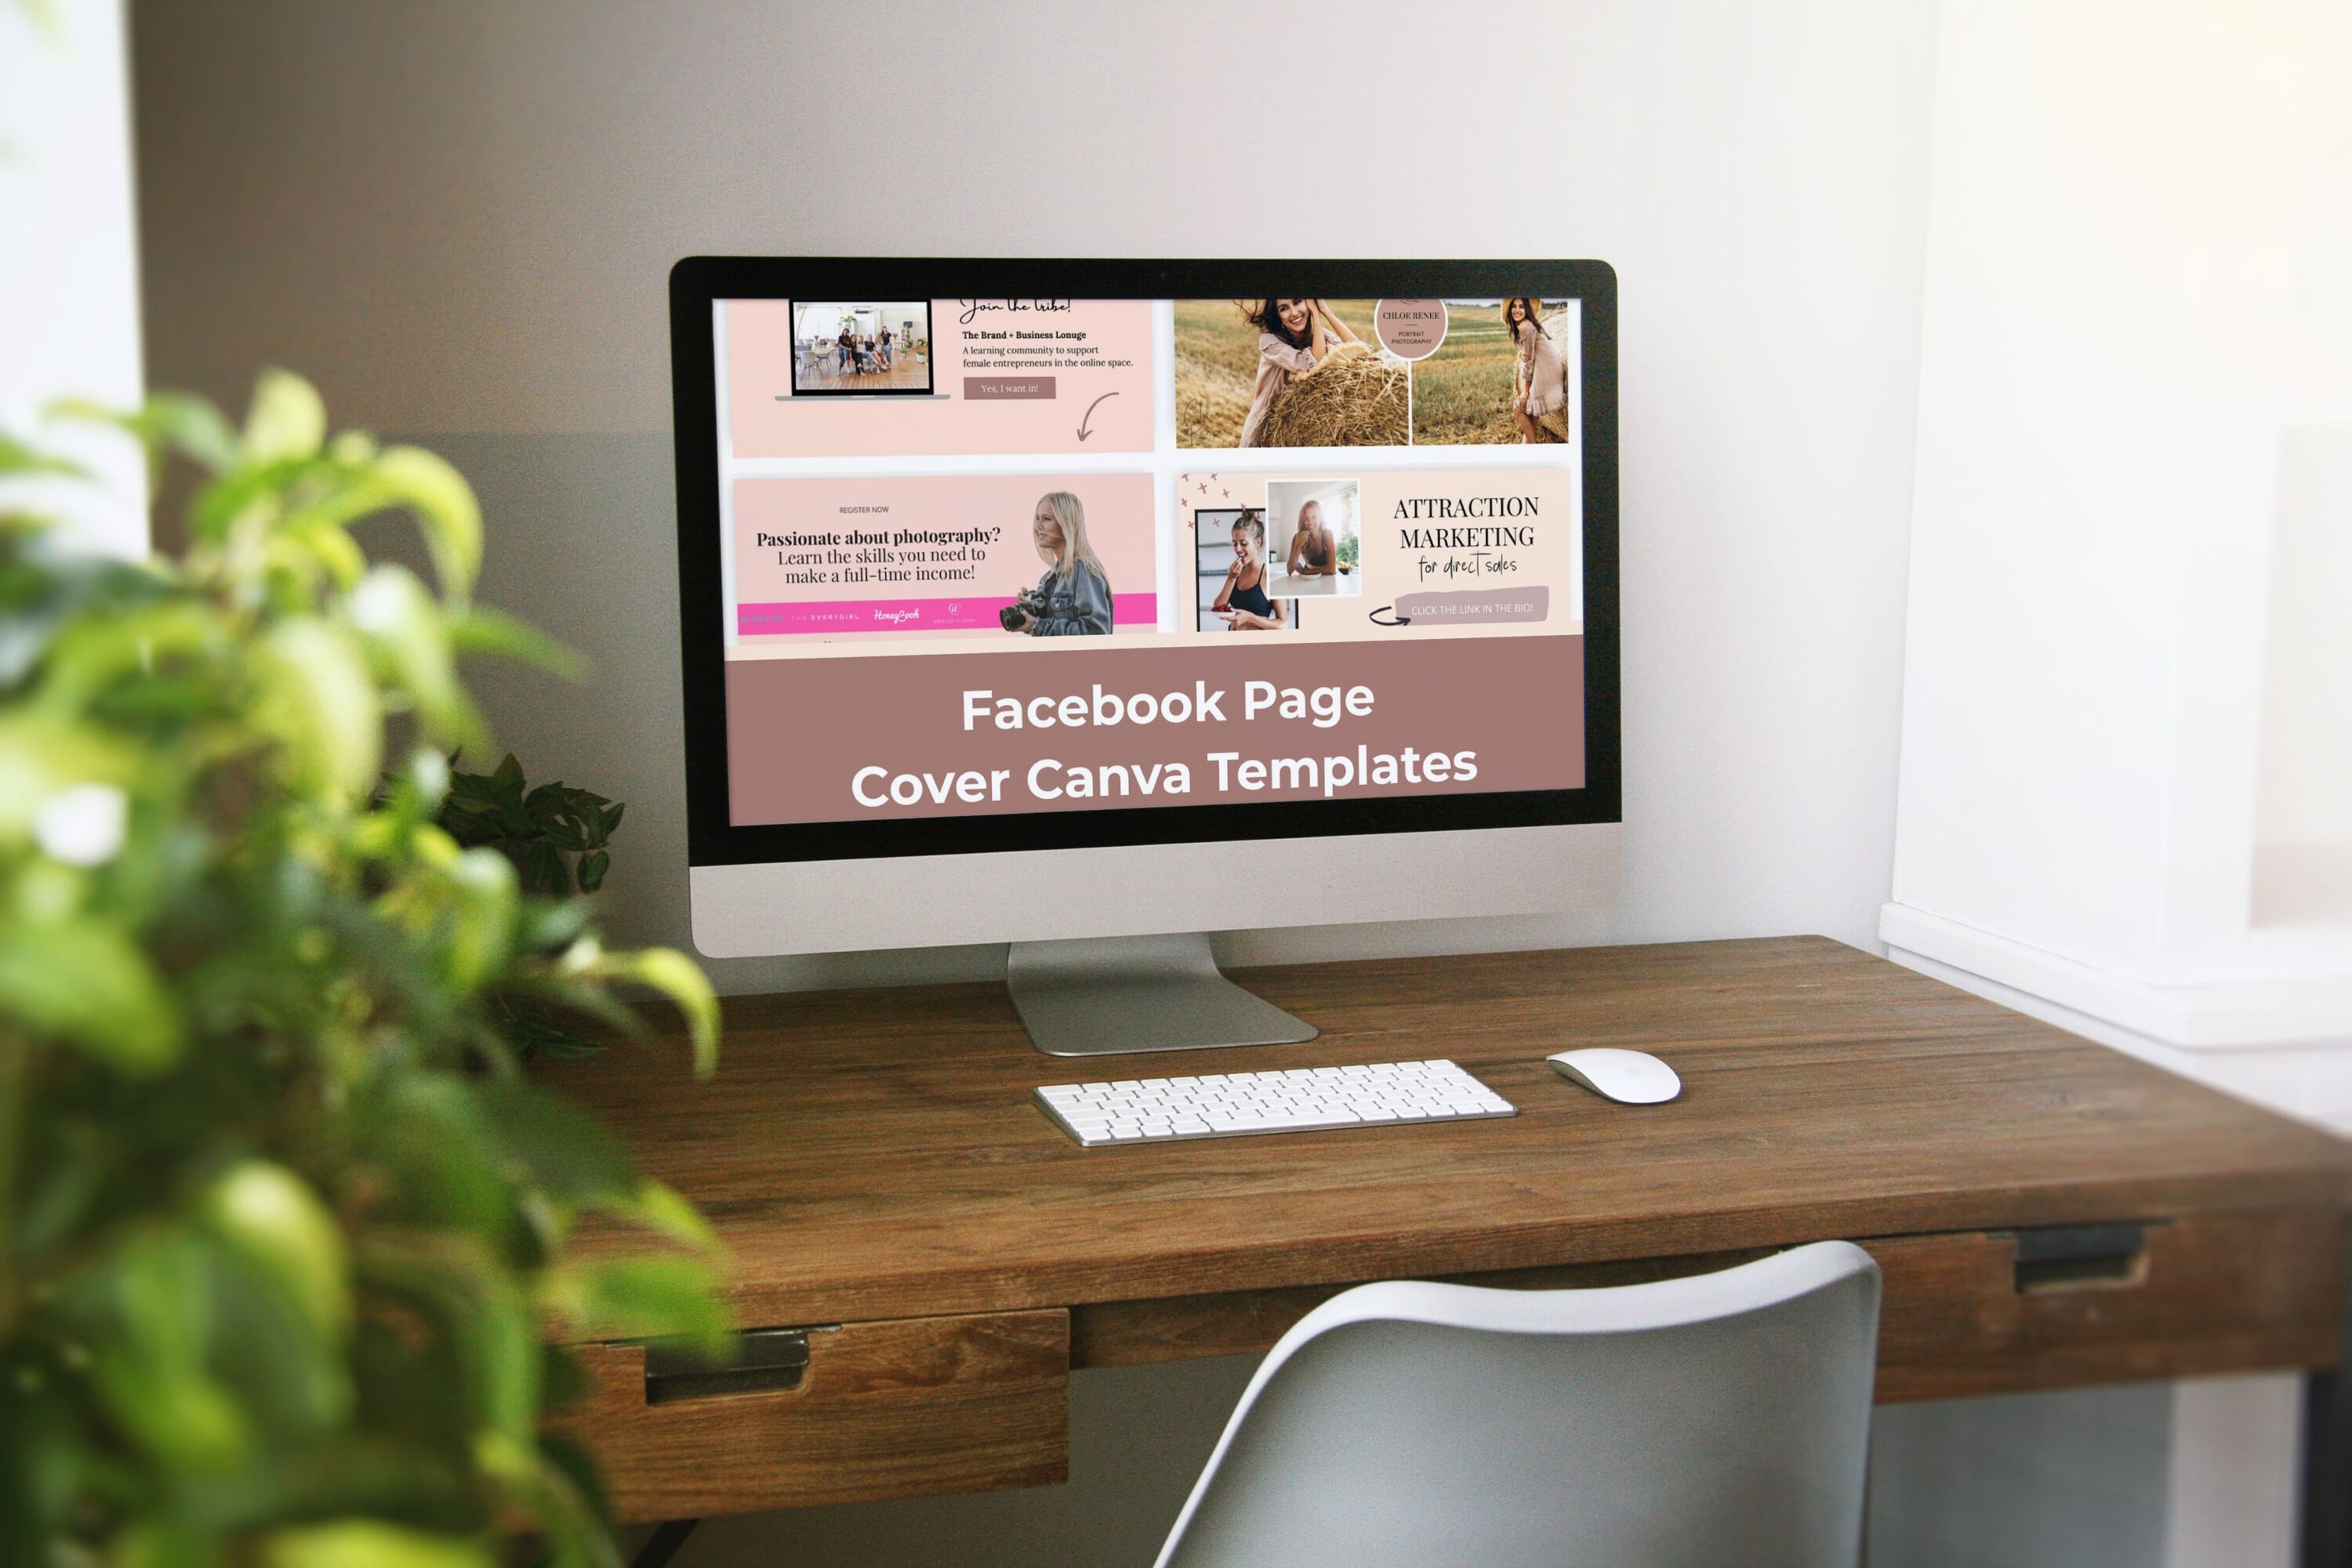 Desktop option of the Facebook Page Cover Canva Templates.